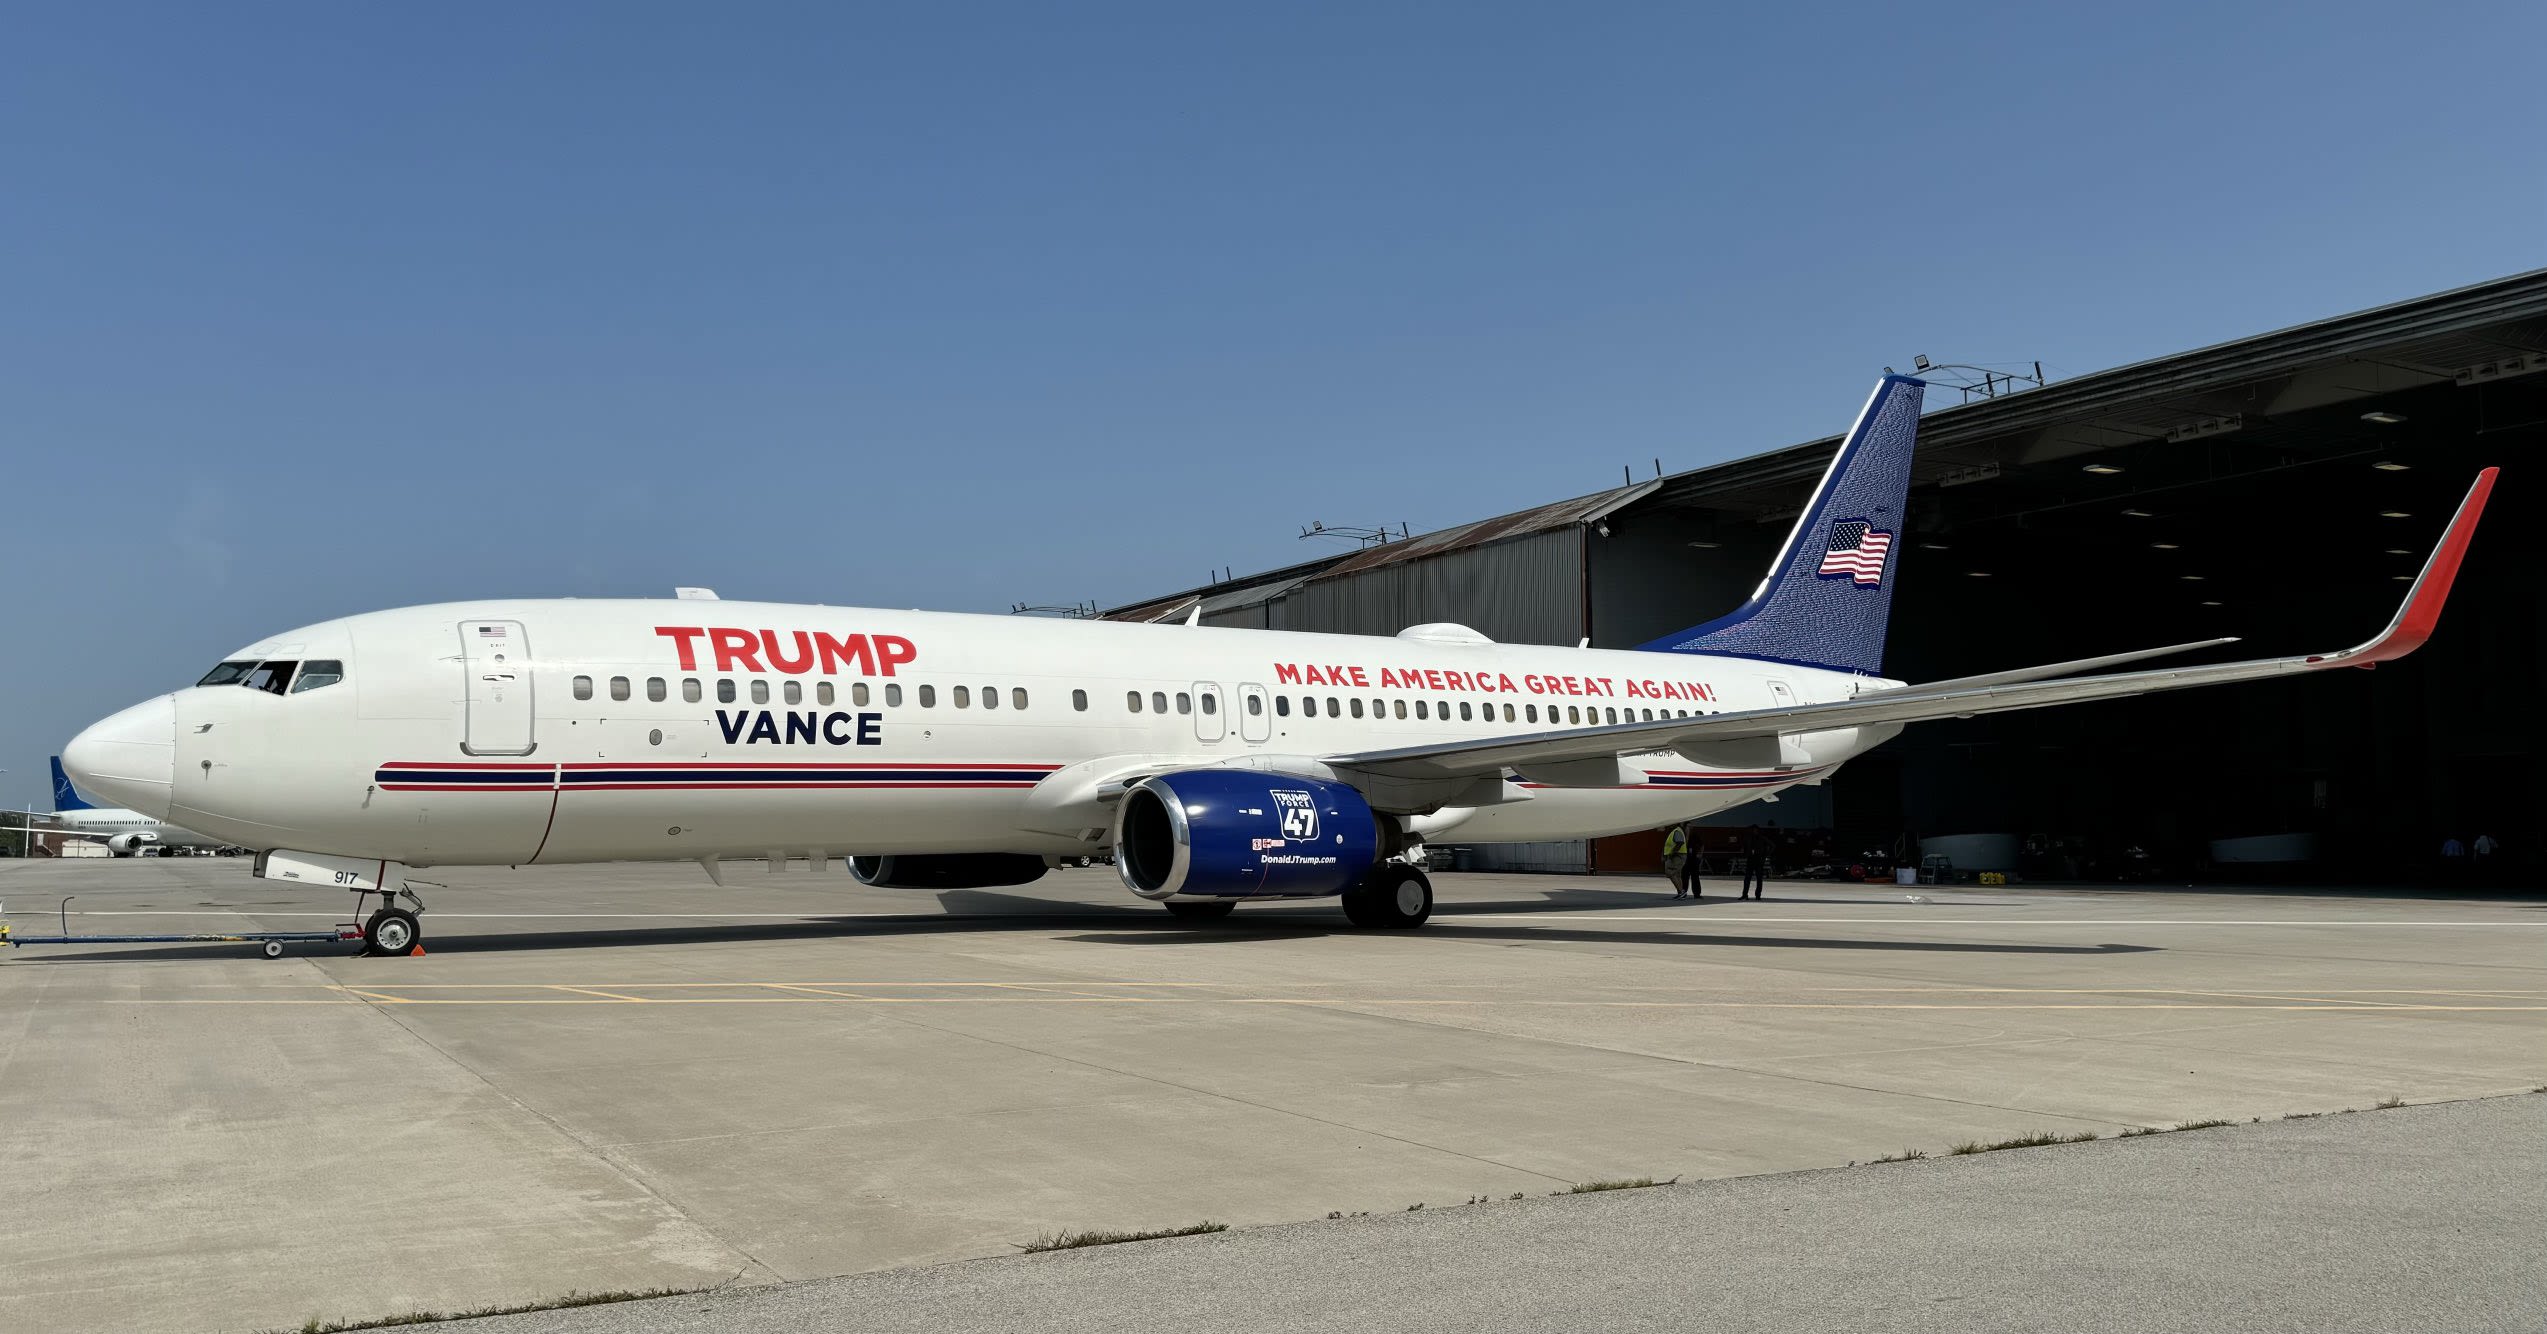 How Trump-Vance campaign's new Boeing 737 differs from Trump Force One